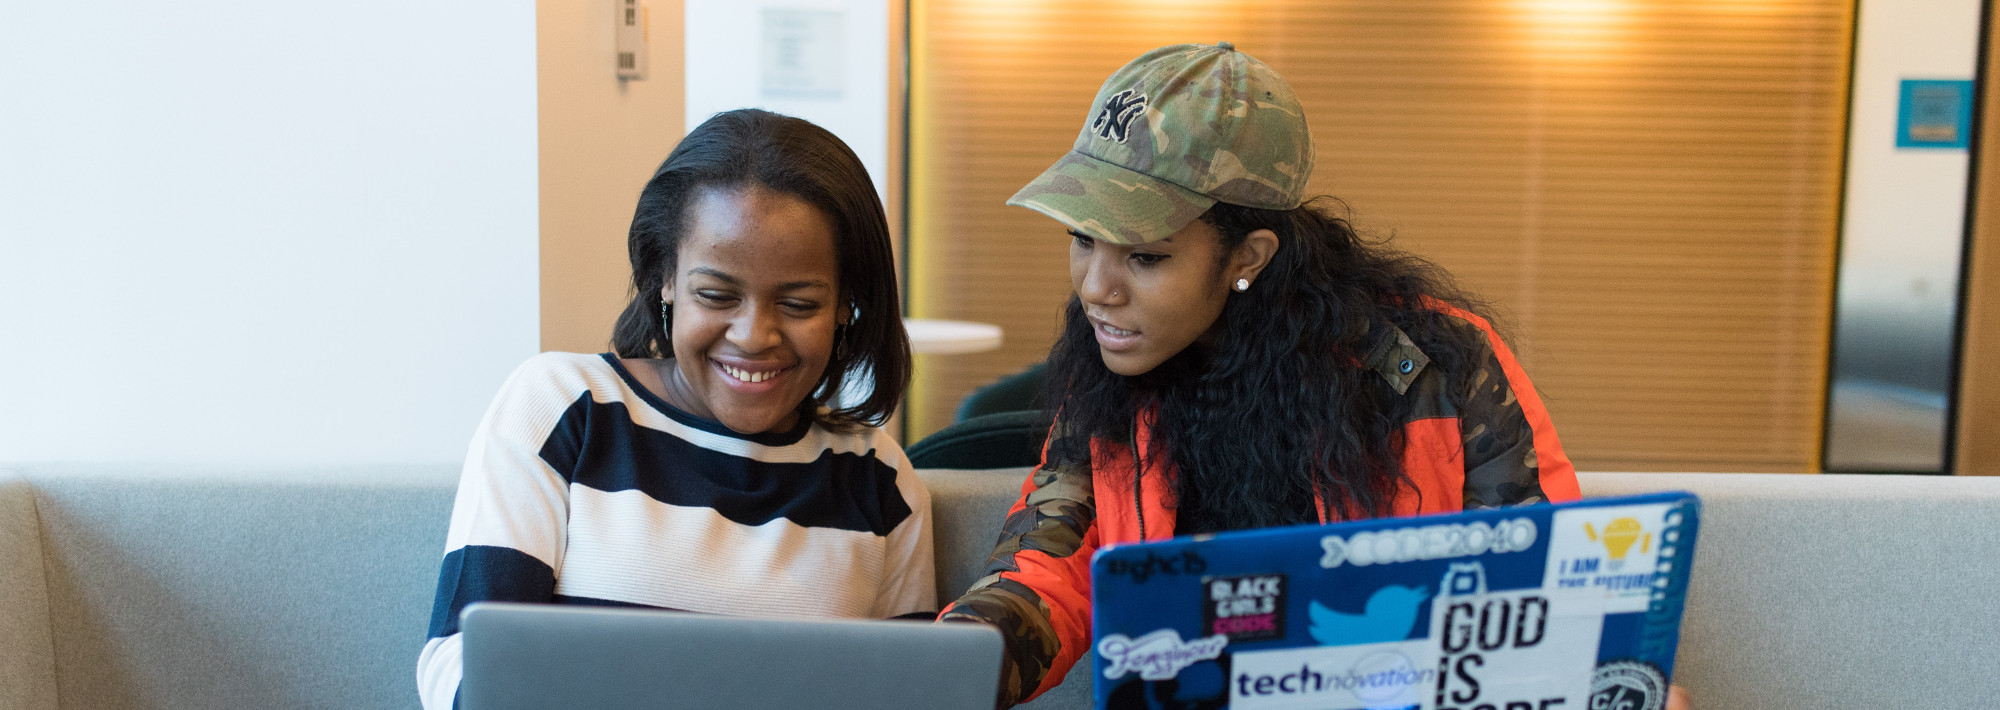 Two Black women with laptops working together.